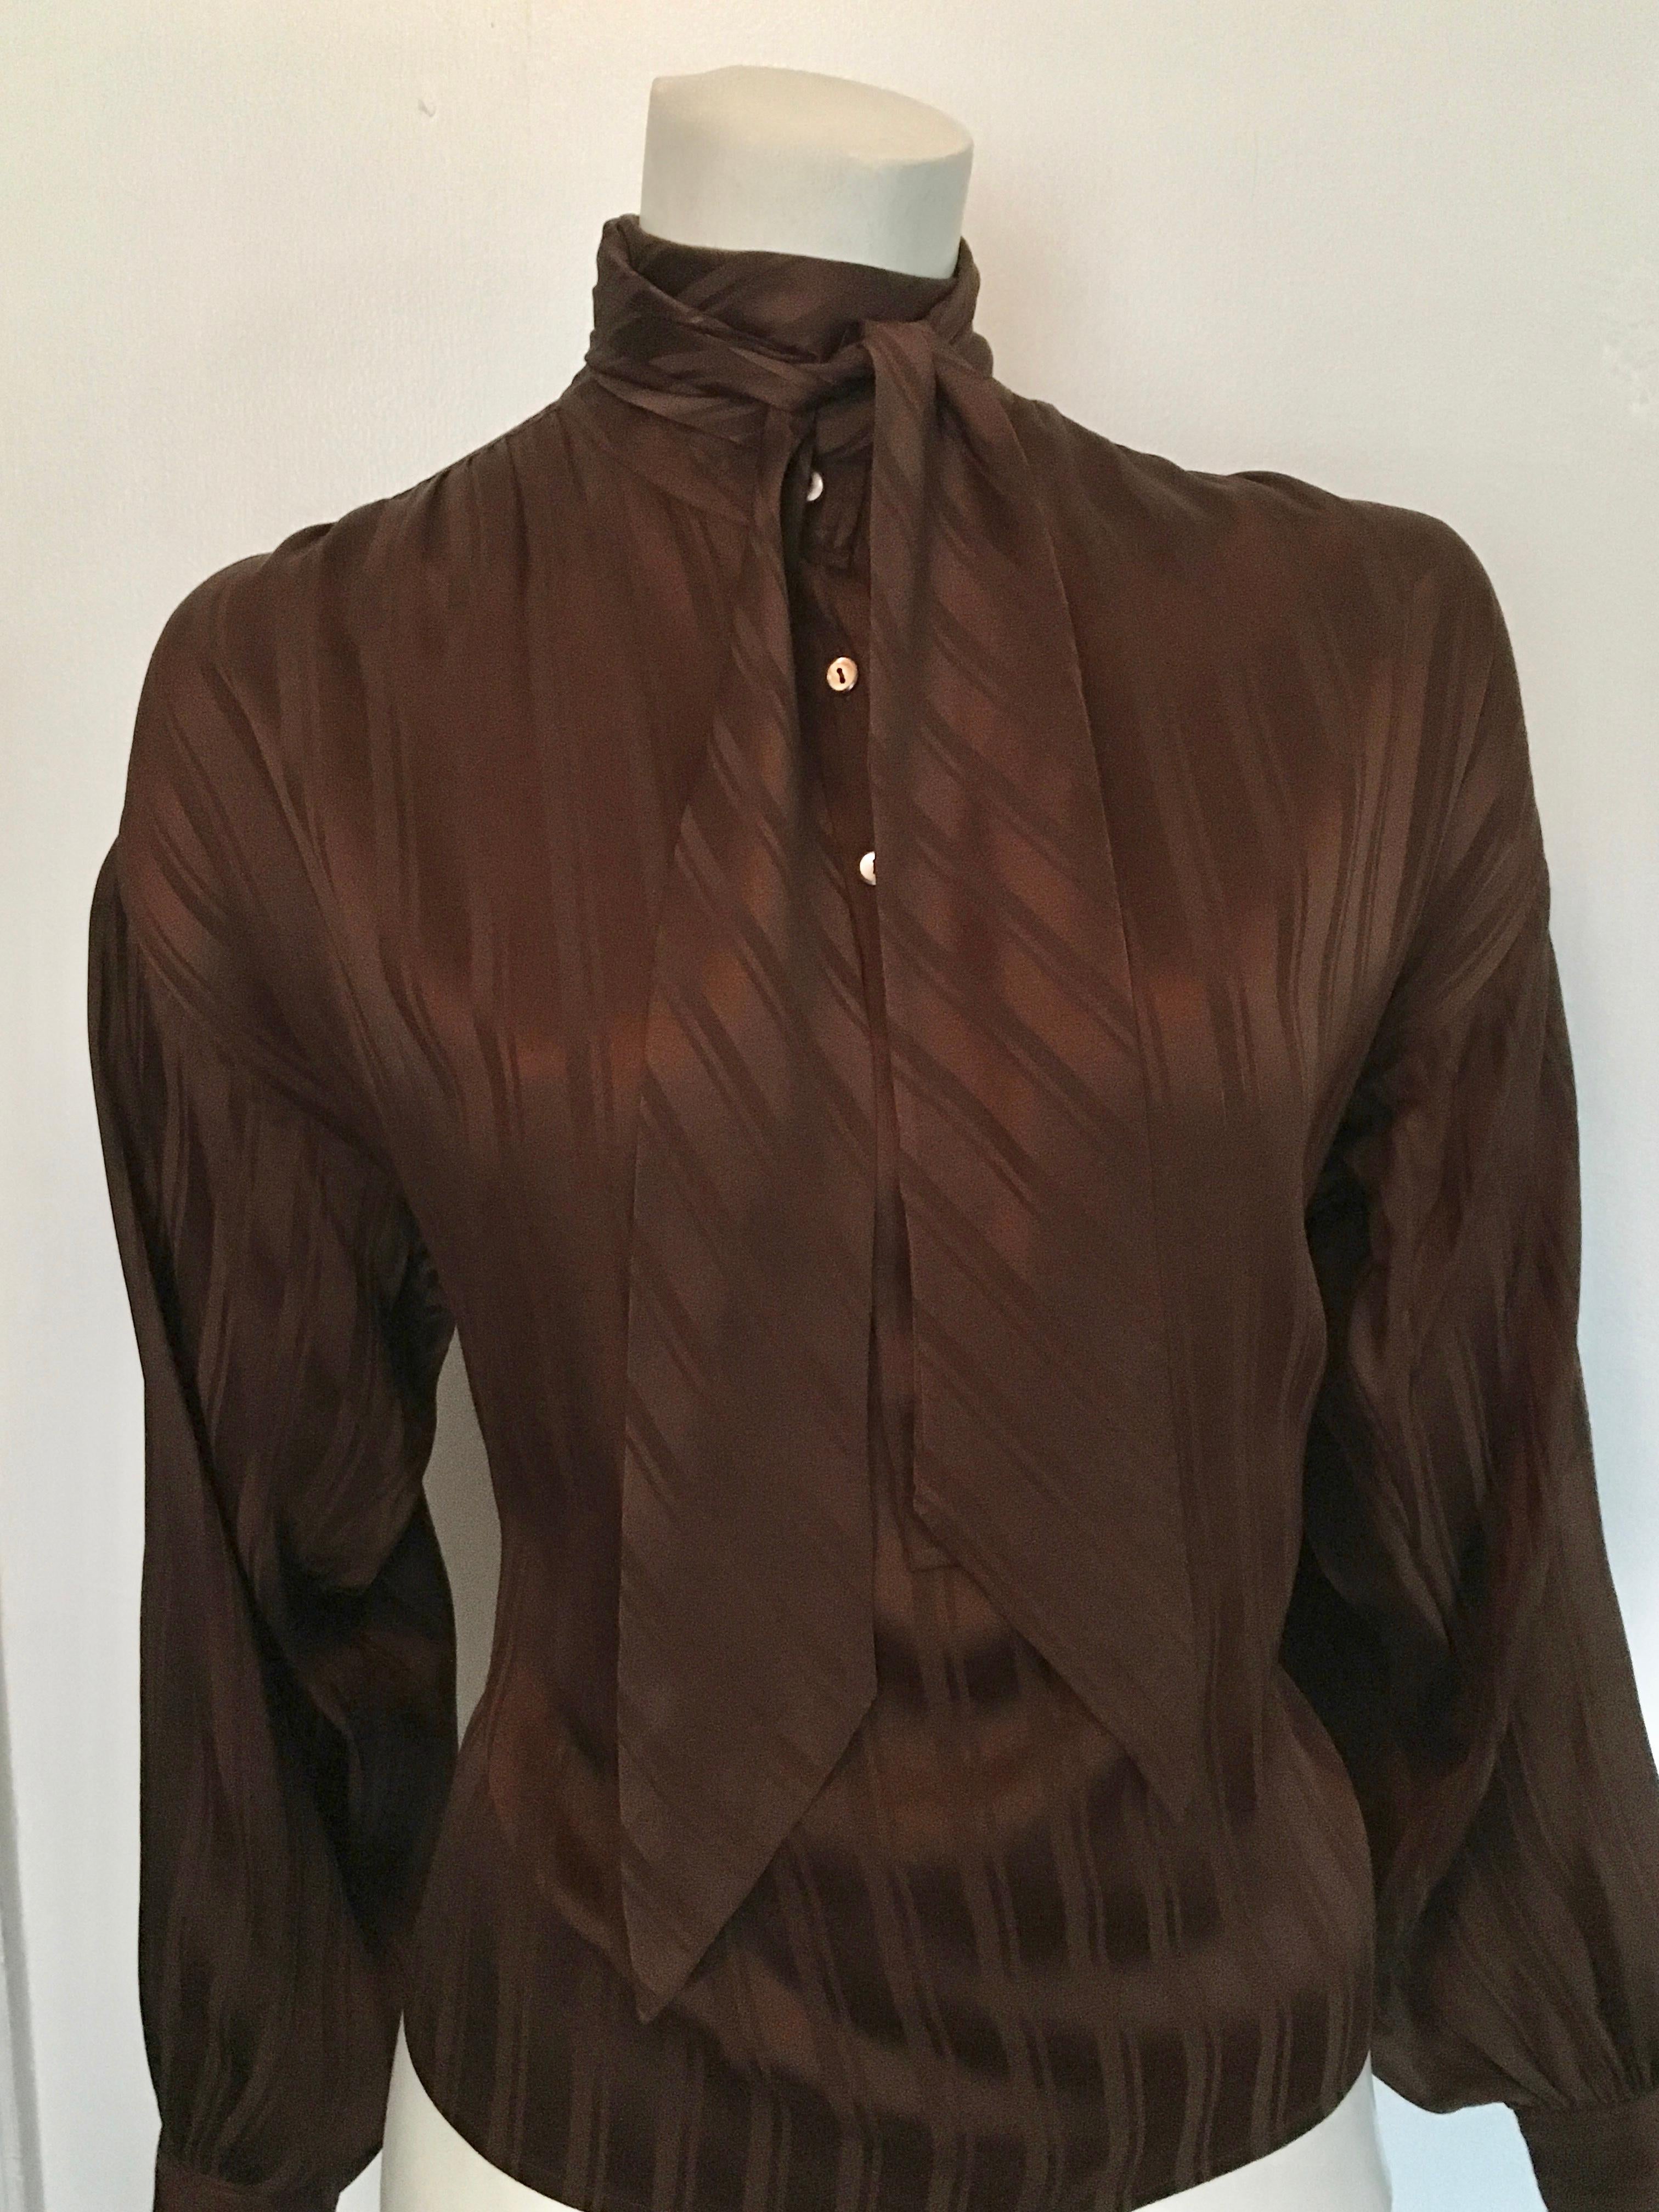 Yves Saint Laurent Rive Gauche1970s brown silk blouse with tie is a size large.  This blouse was designed to be overflowing and blousy and will fit sizes 6, 8, 10 but you be the judge of that. Classic striped pattern with tie, this blouse will have